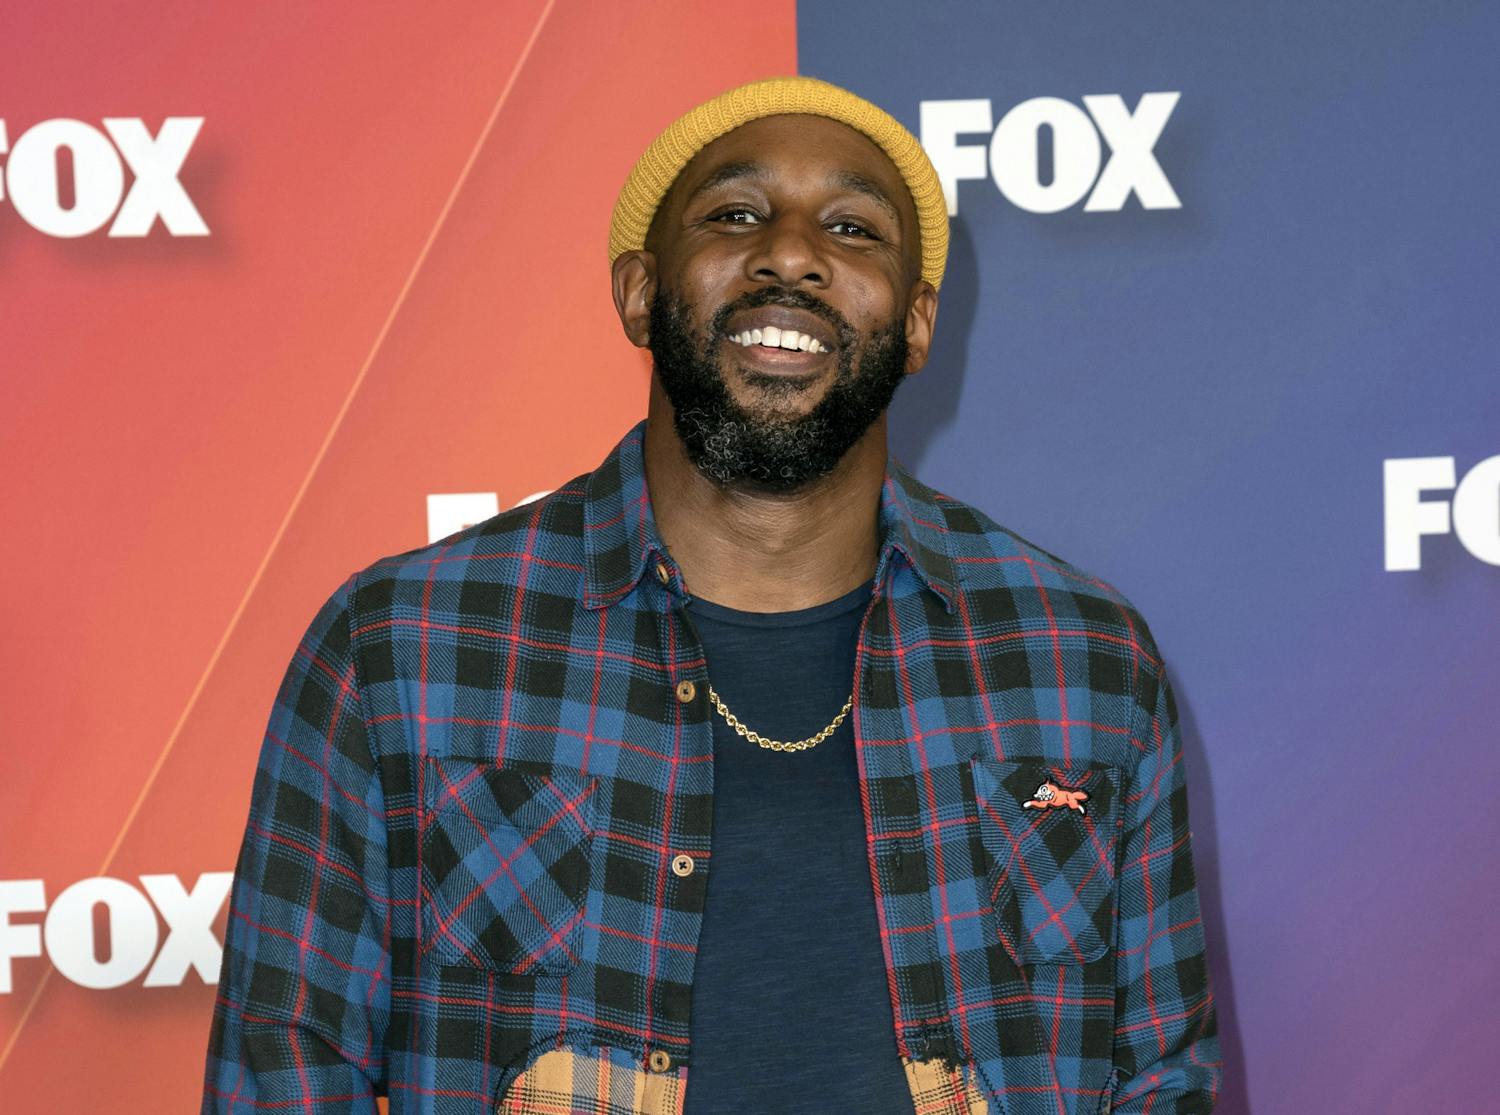 Stephen &quot;tWitch&quot; Boss appears at the FOX 2022 Upfront presentation in New York on May 16, 2022. 